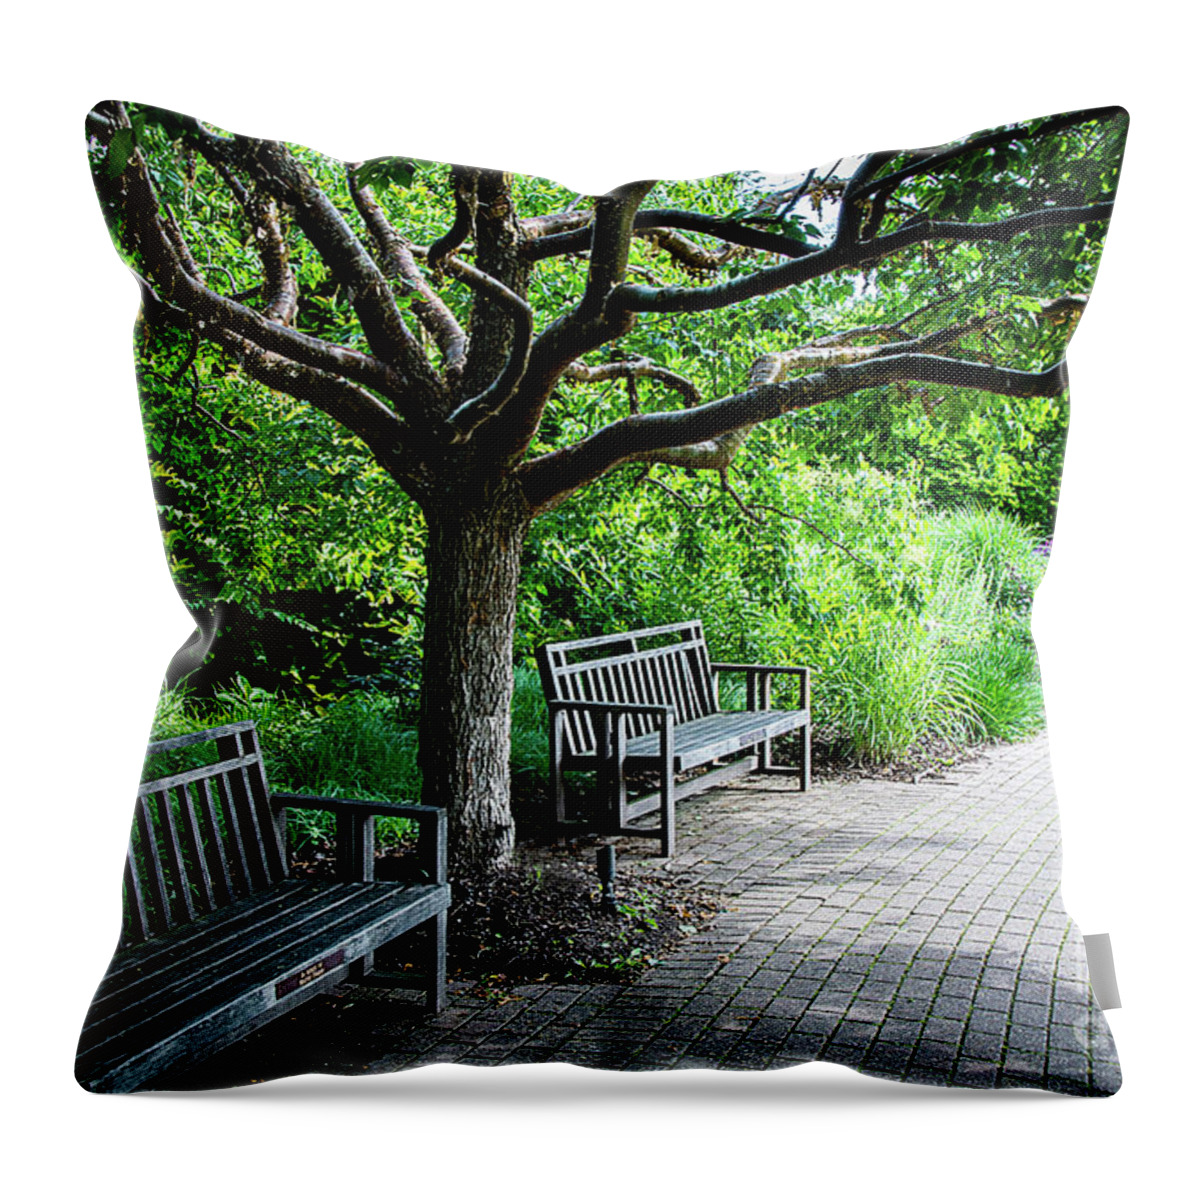 Outdoors Throw Pillow featuring the photograph Intertwined by Deborah Klubertanz